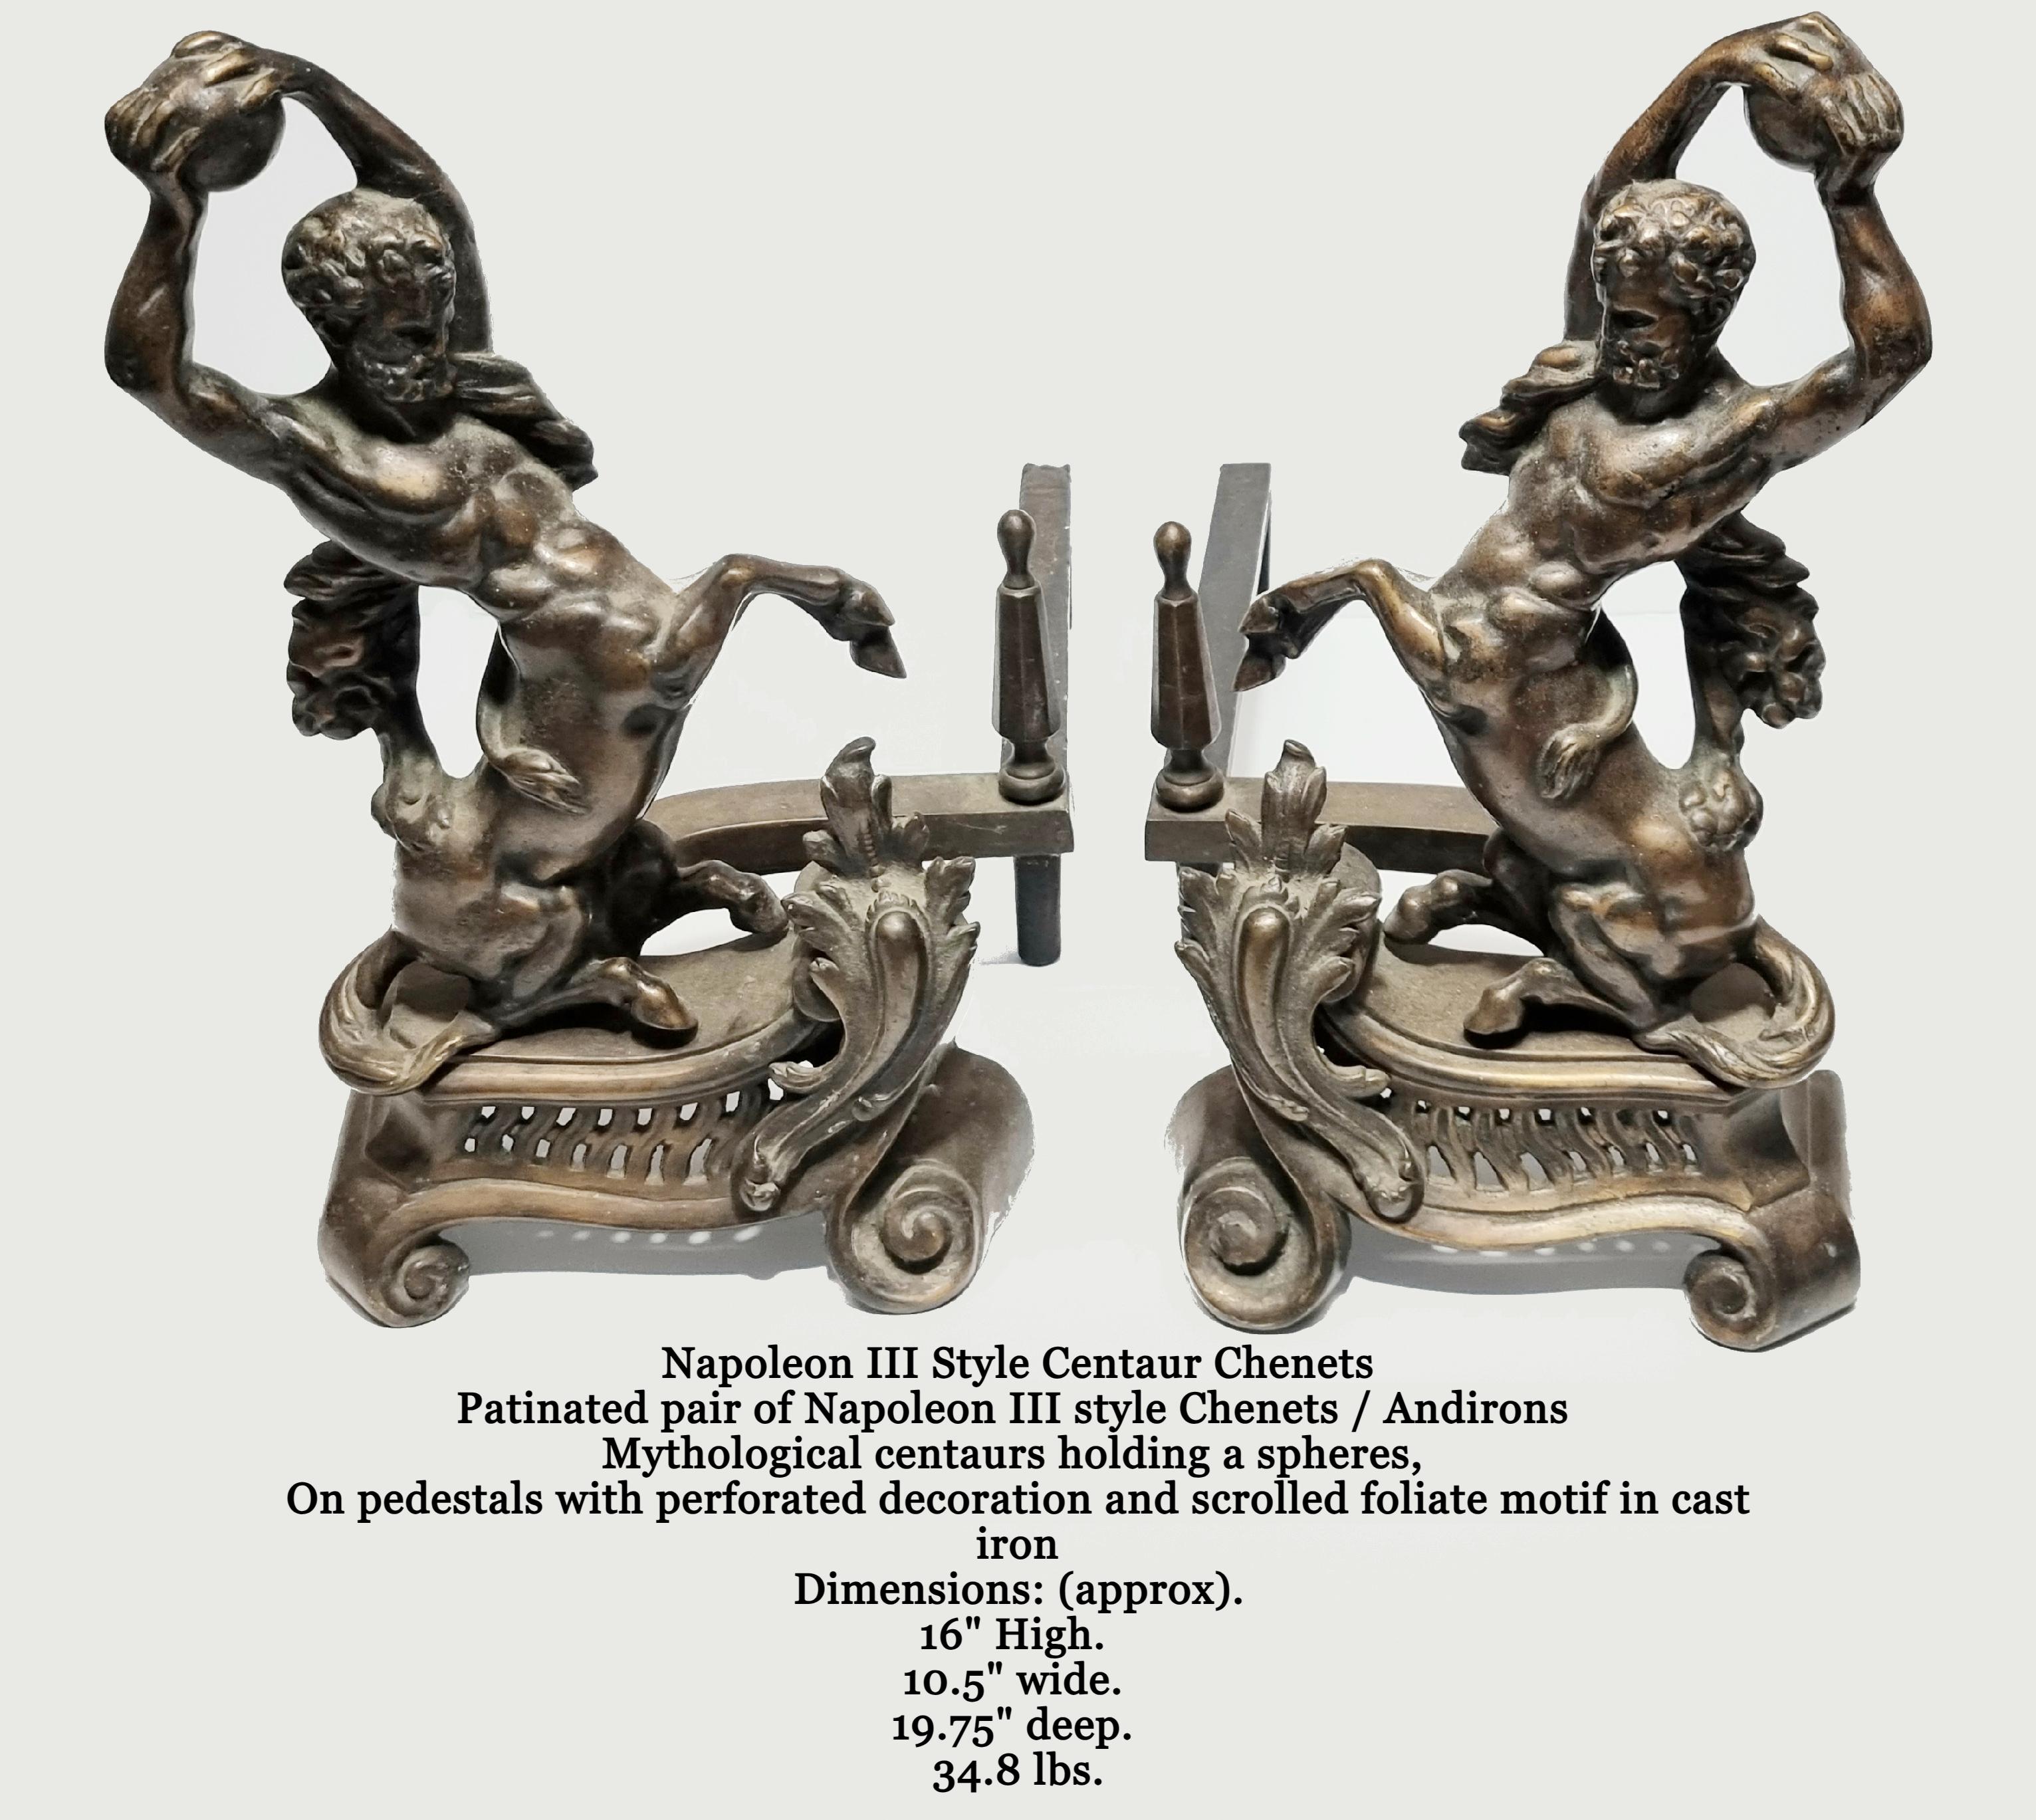 Napoleon III Style Centaur Andirons
19th / 20th century,
Patinated pair of Napoleon III style andirons 

Mythological centaurs holding a spheres, on pedestals with perforated decoration and scrolled foliate motif in cast iron
Dimensions: